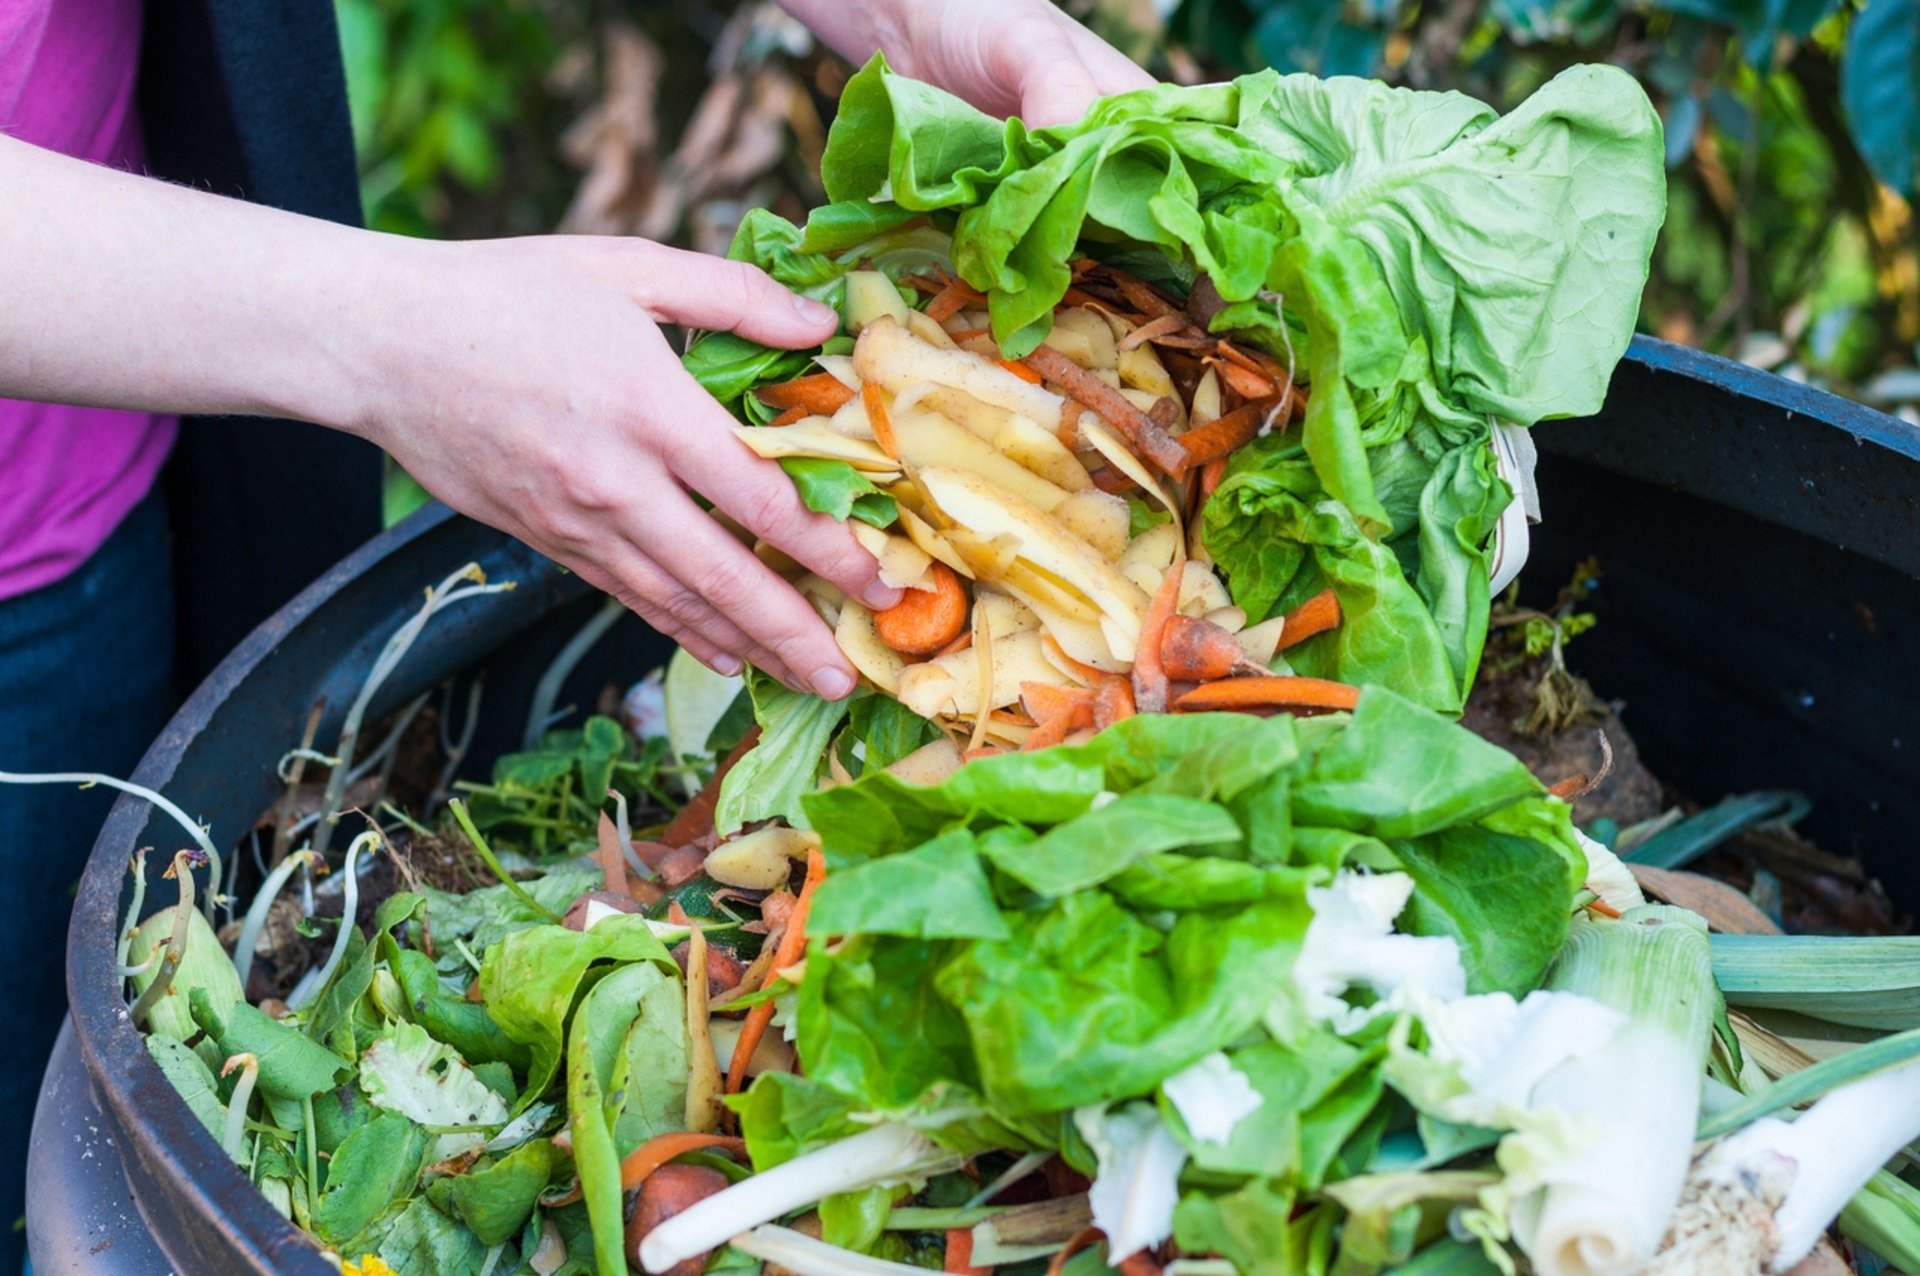 person emptying compost to prevent food waste